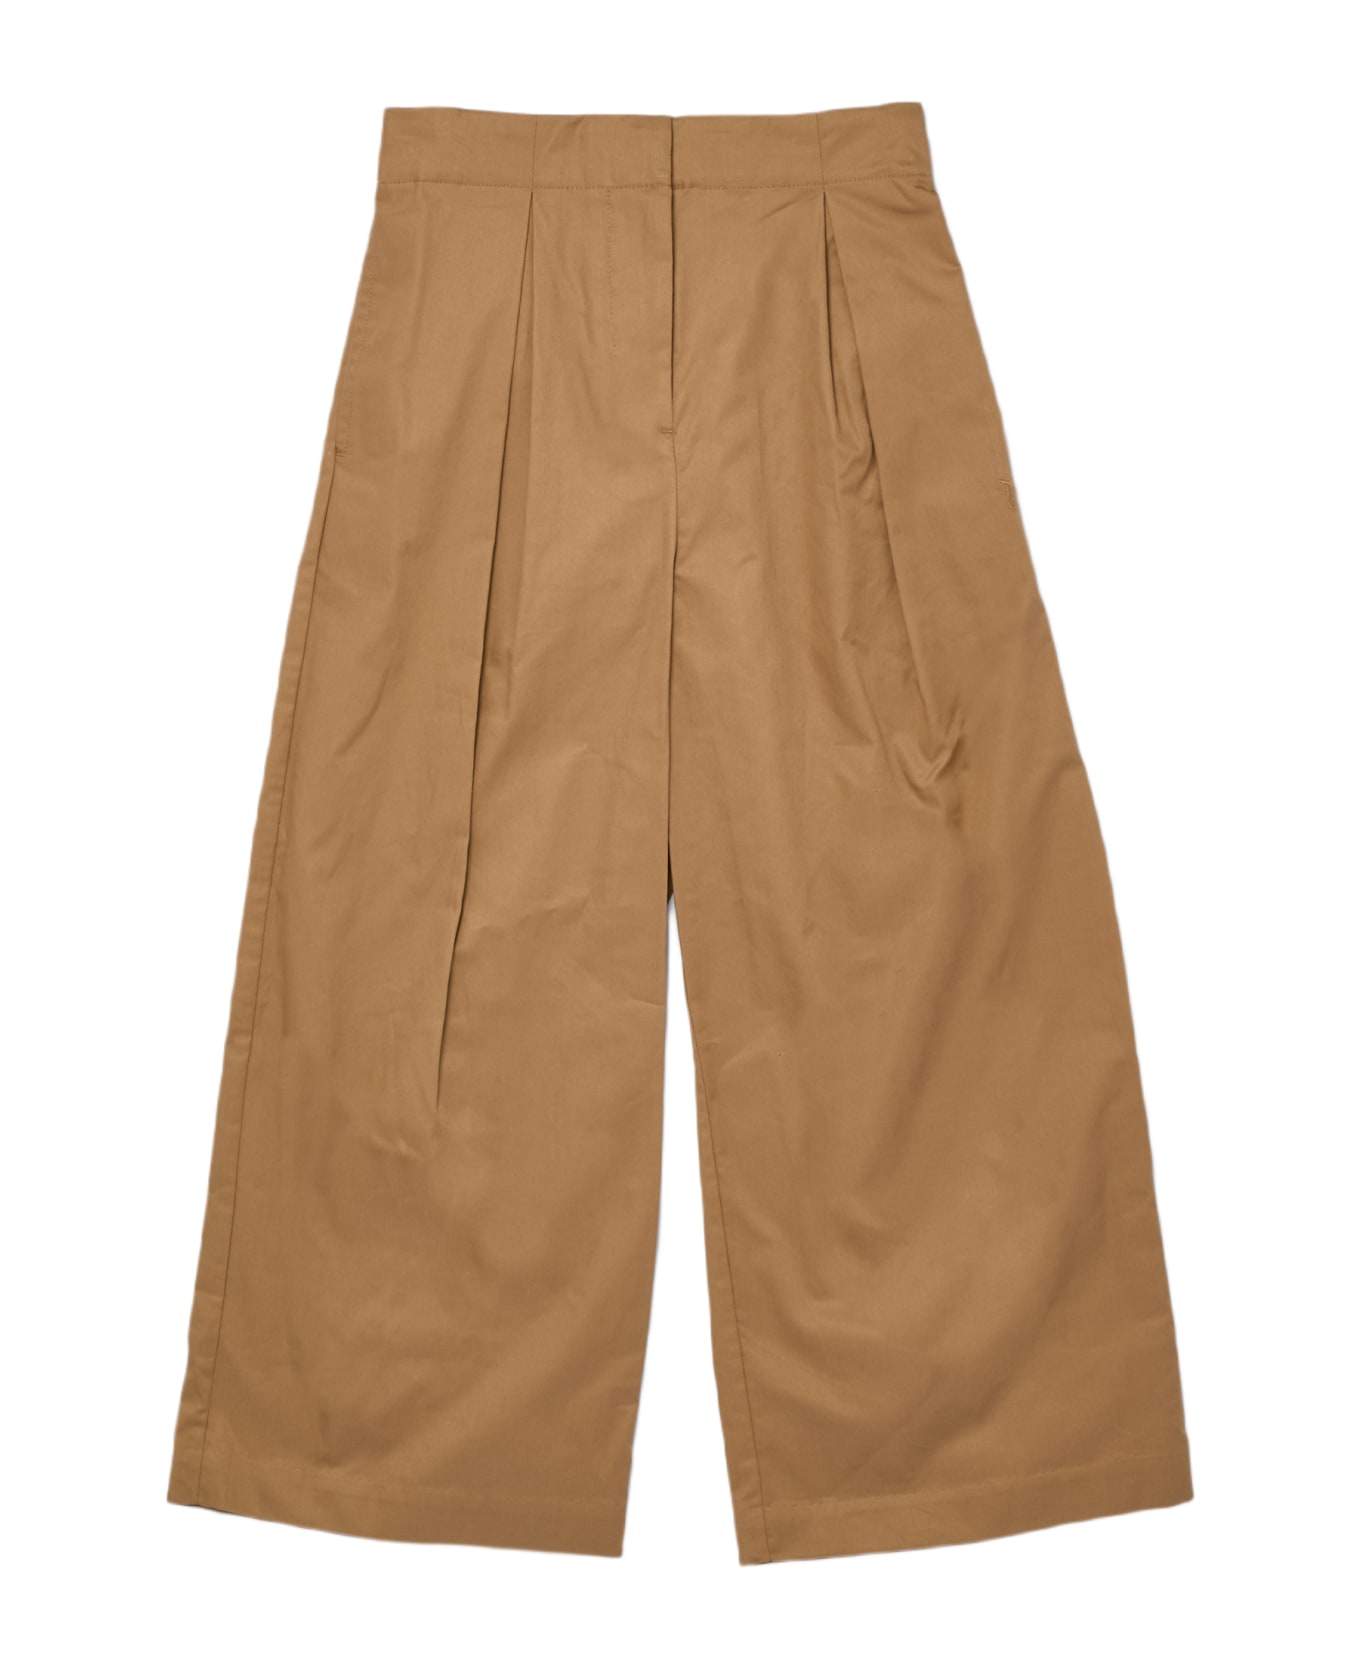 Burberry Hermia Trousers - BEIGE ボトムス